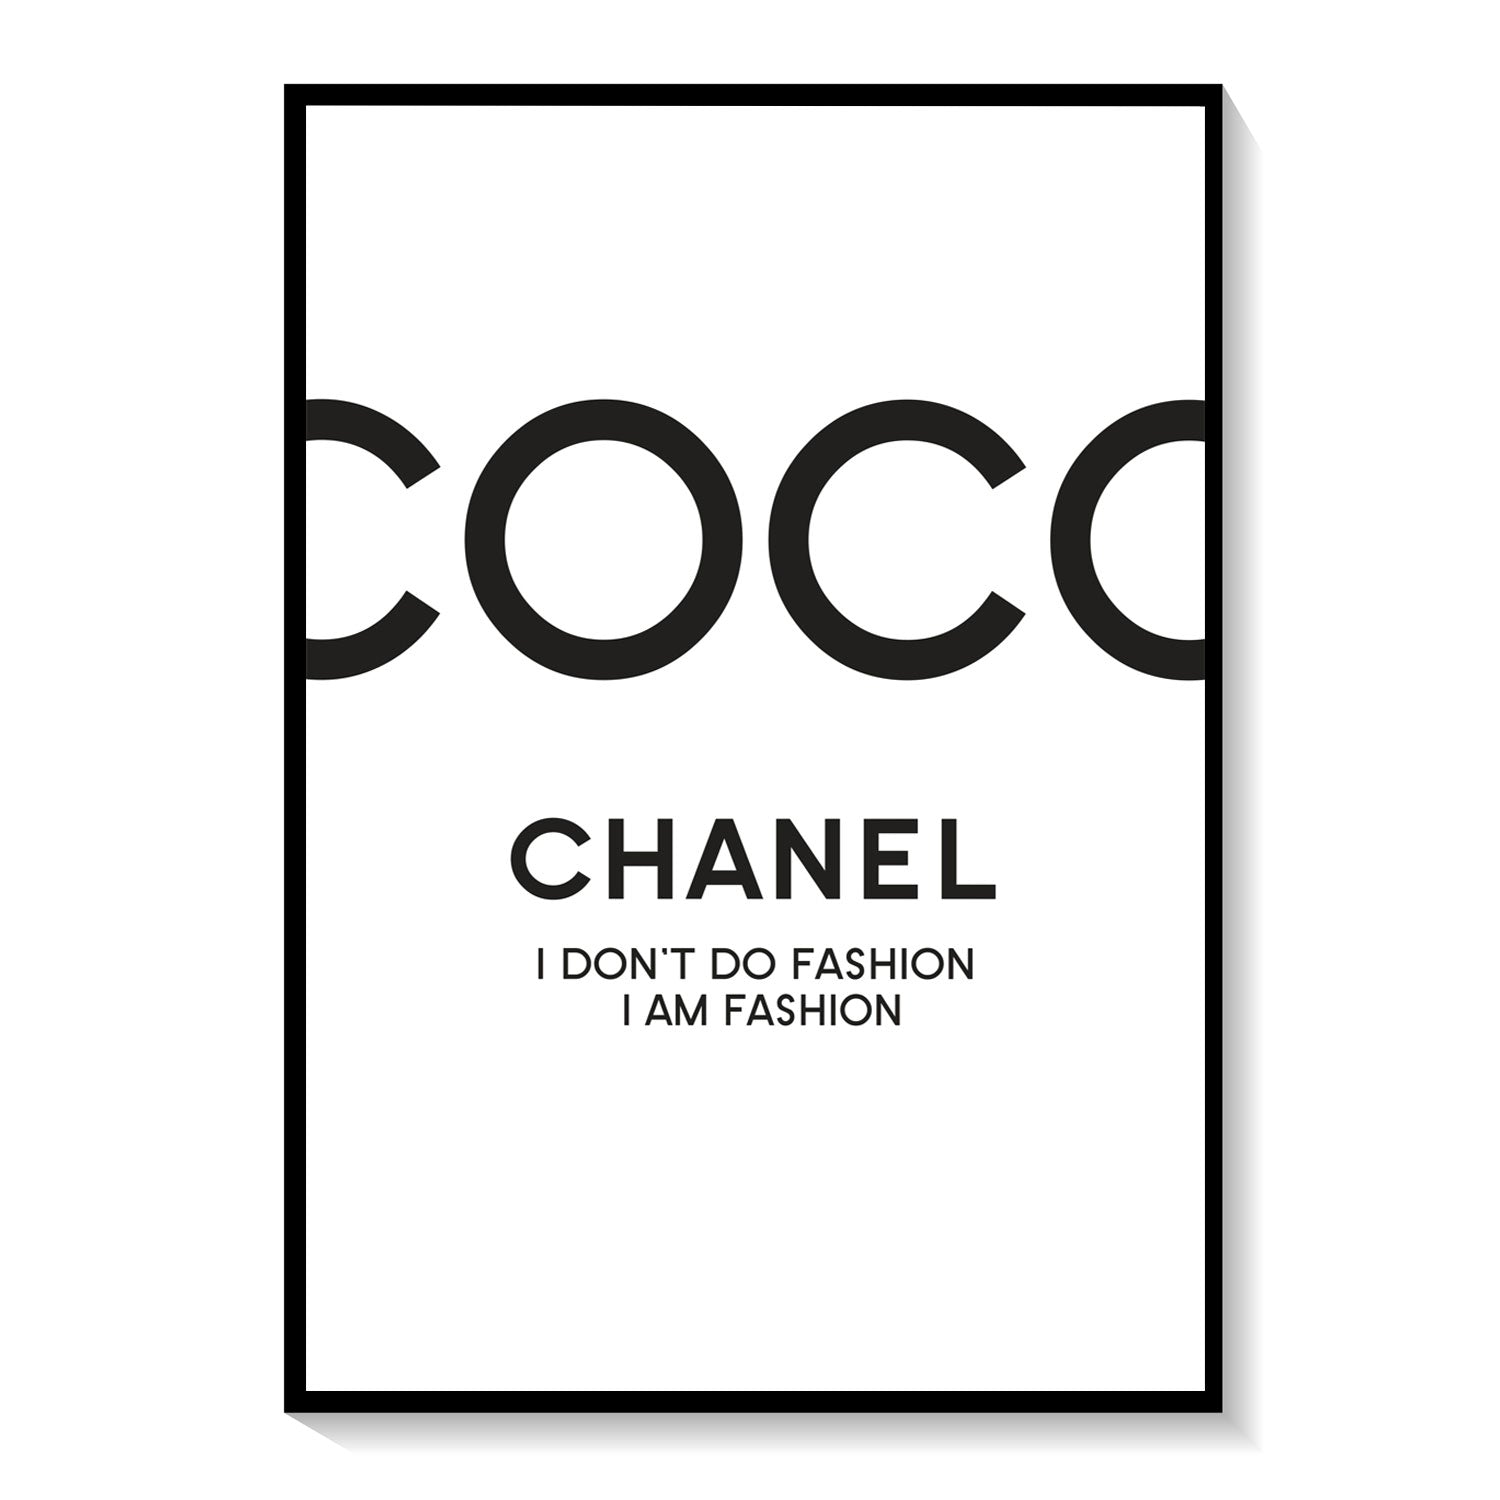 Happy shopping Coco Chanel Poster (Click for full image), coco chanel wall  art canvas